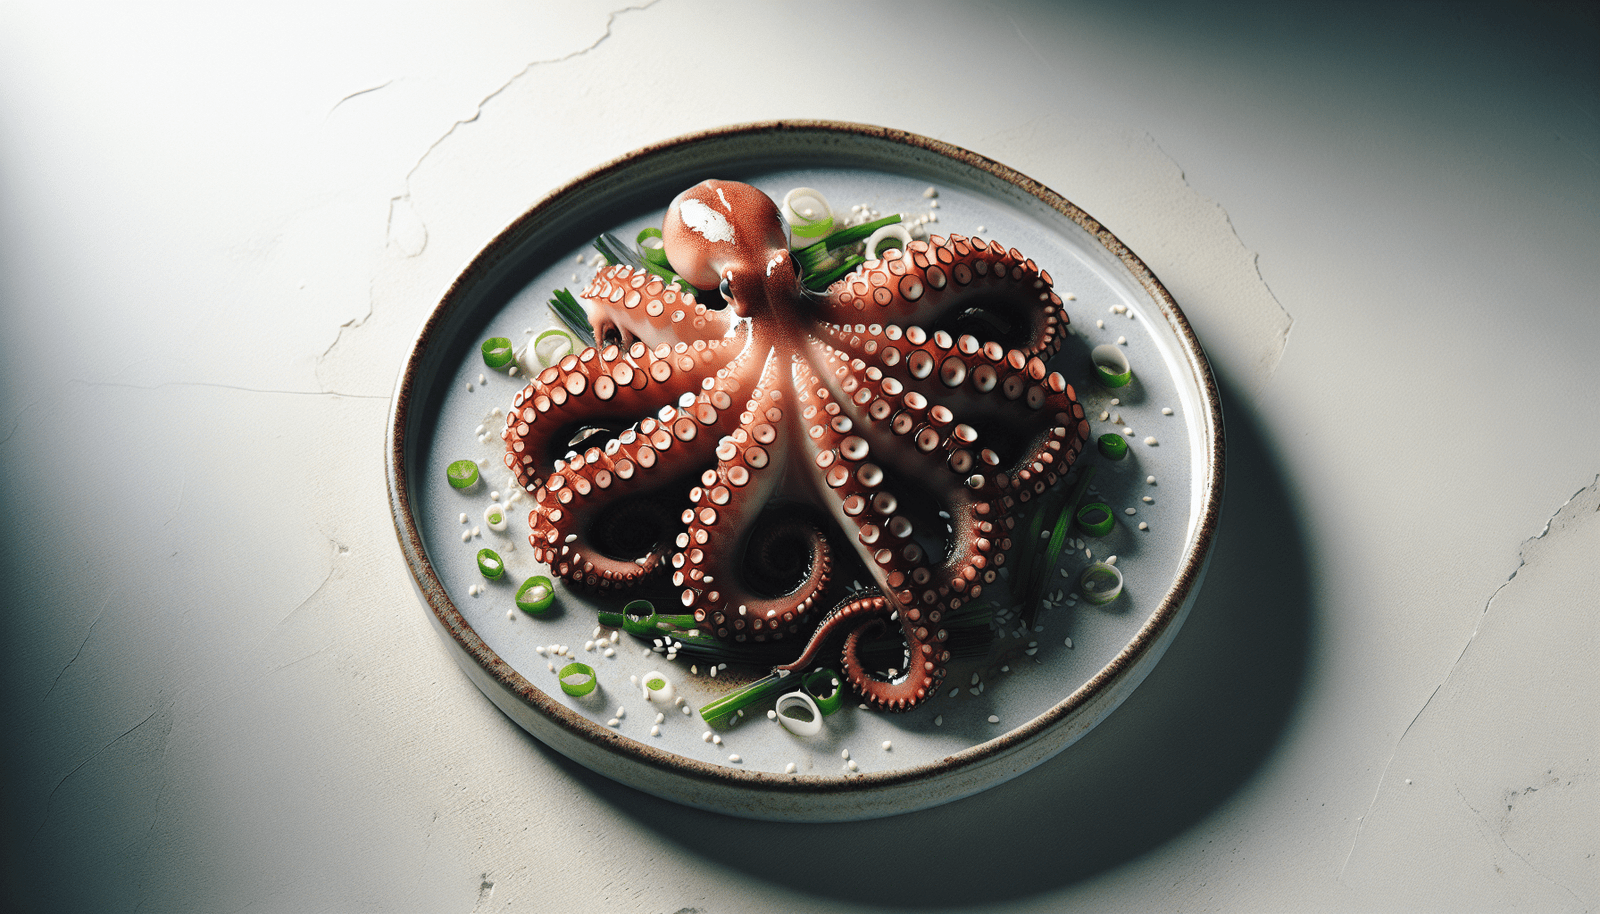 How Do You Properly Cook And Enjoy Live Octopus (sannakji) At Home?